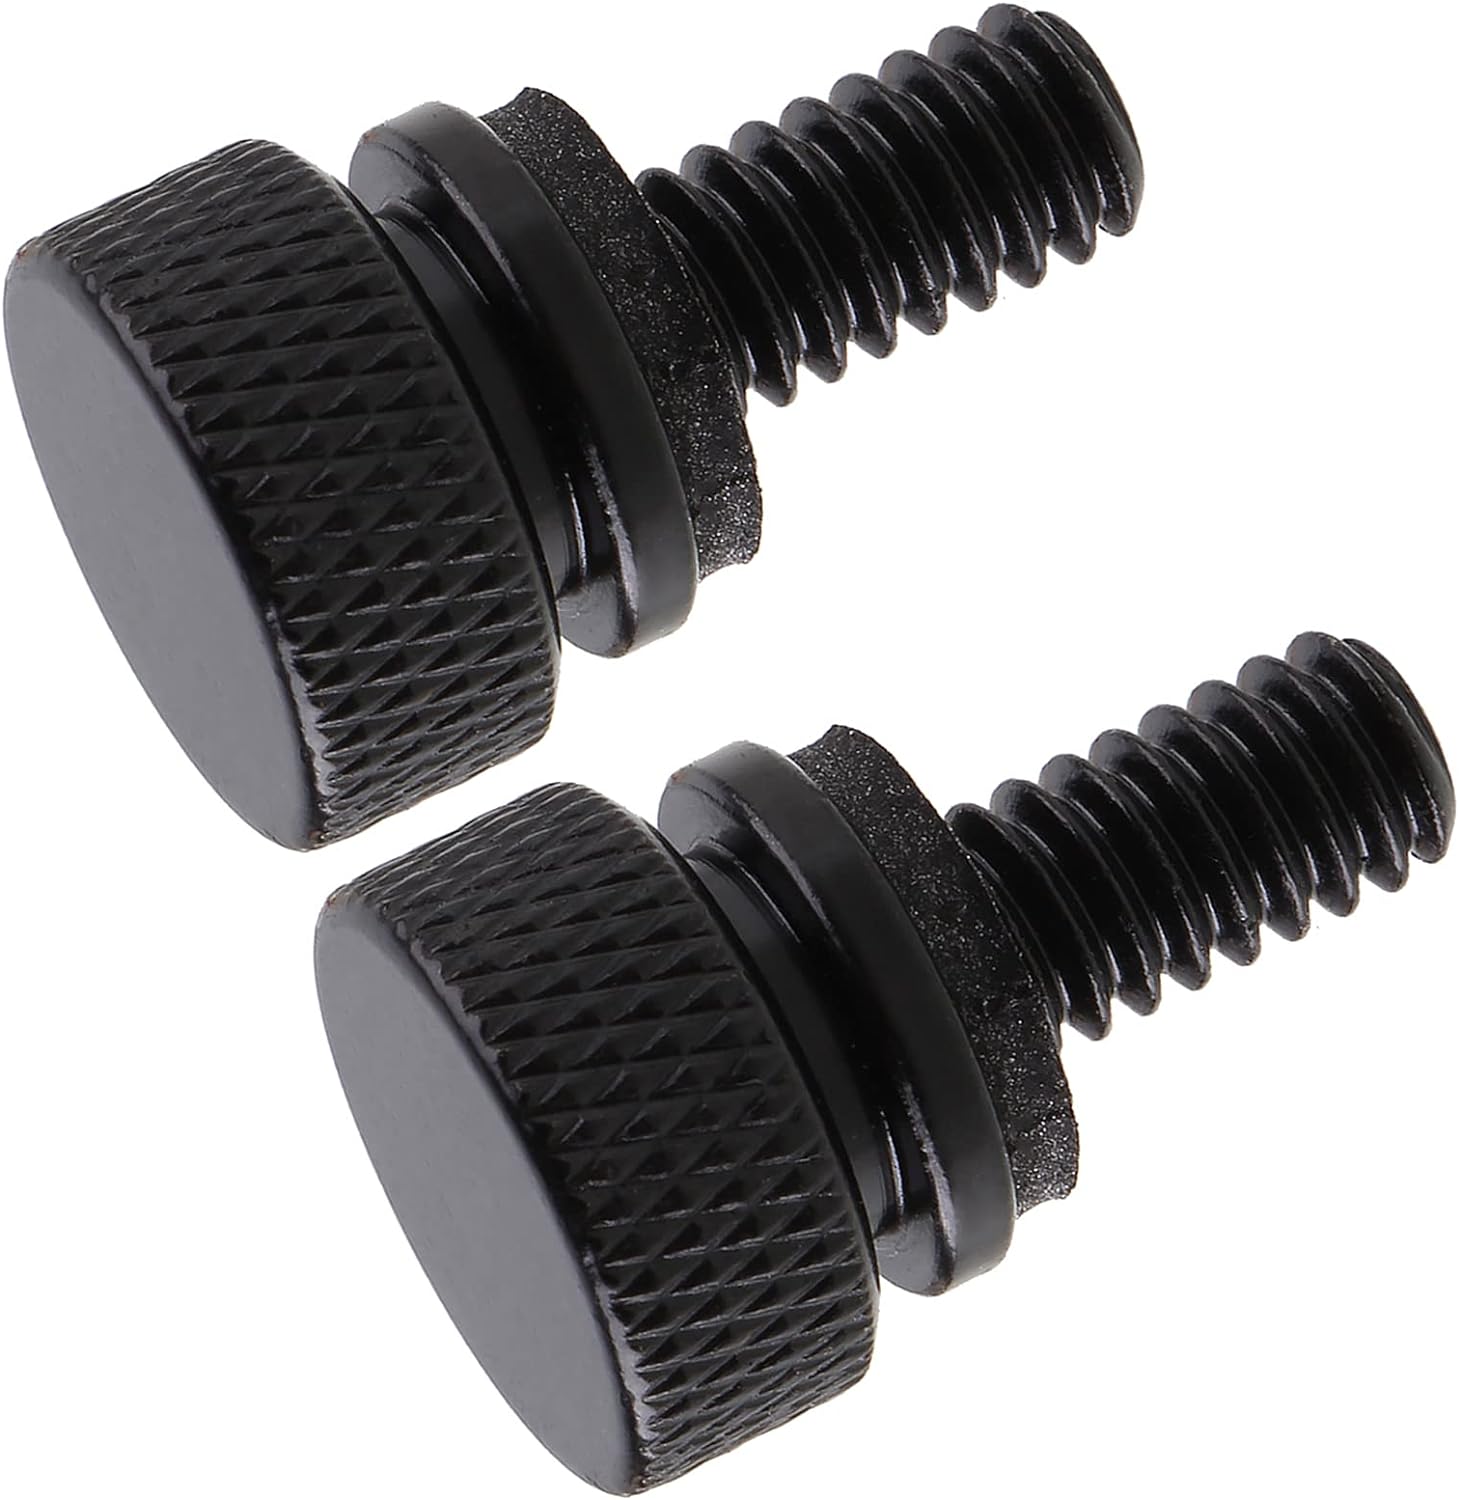 Stainless Steel Seat Bolt Rear Mount Screw Black Compatible with Harley Davidson 1996-2023,2 PCS - Harley Davidson Seat Bolt Rear Mount Screw Review